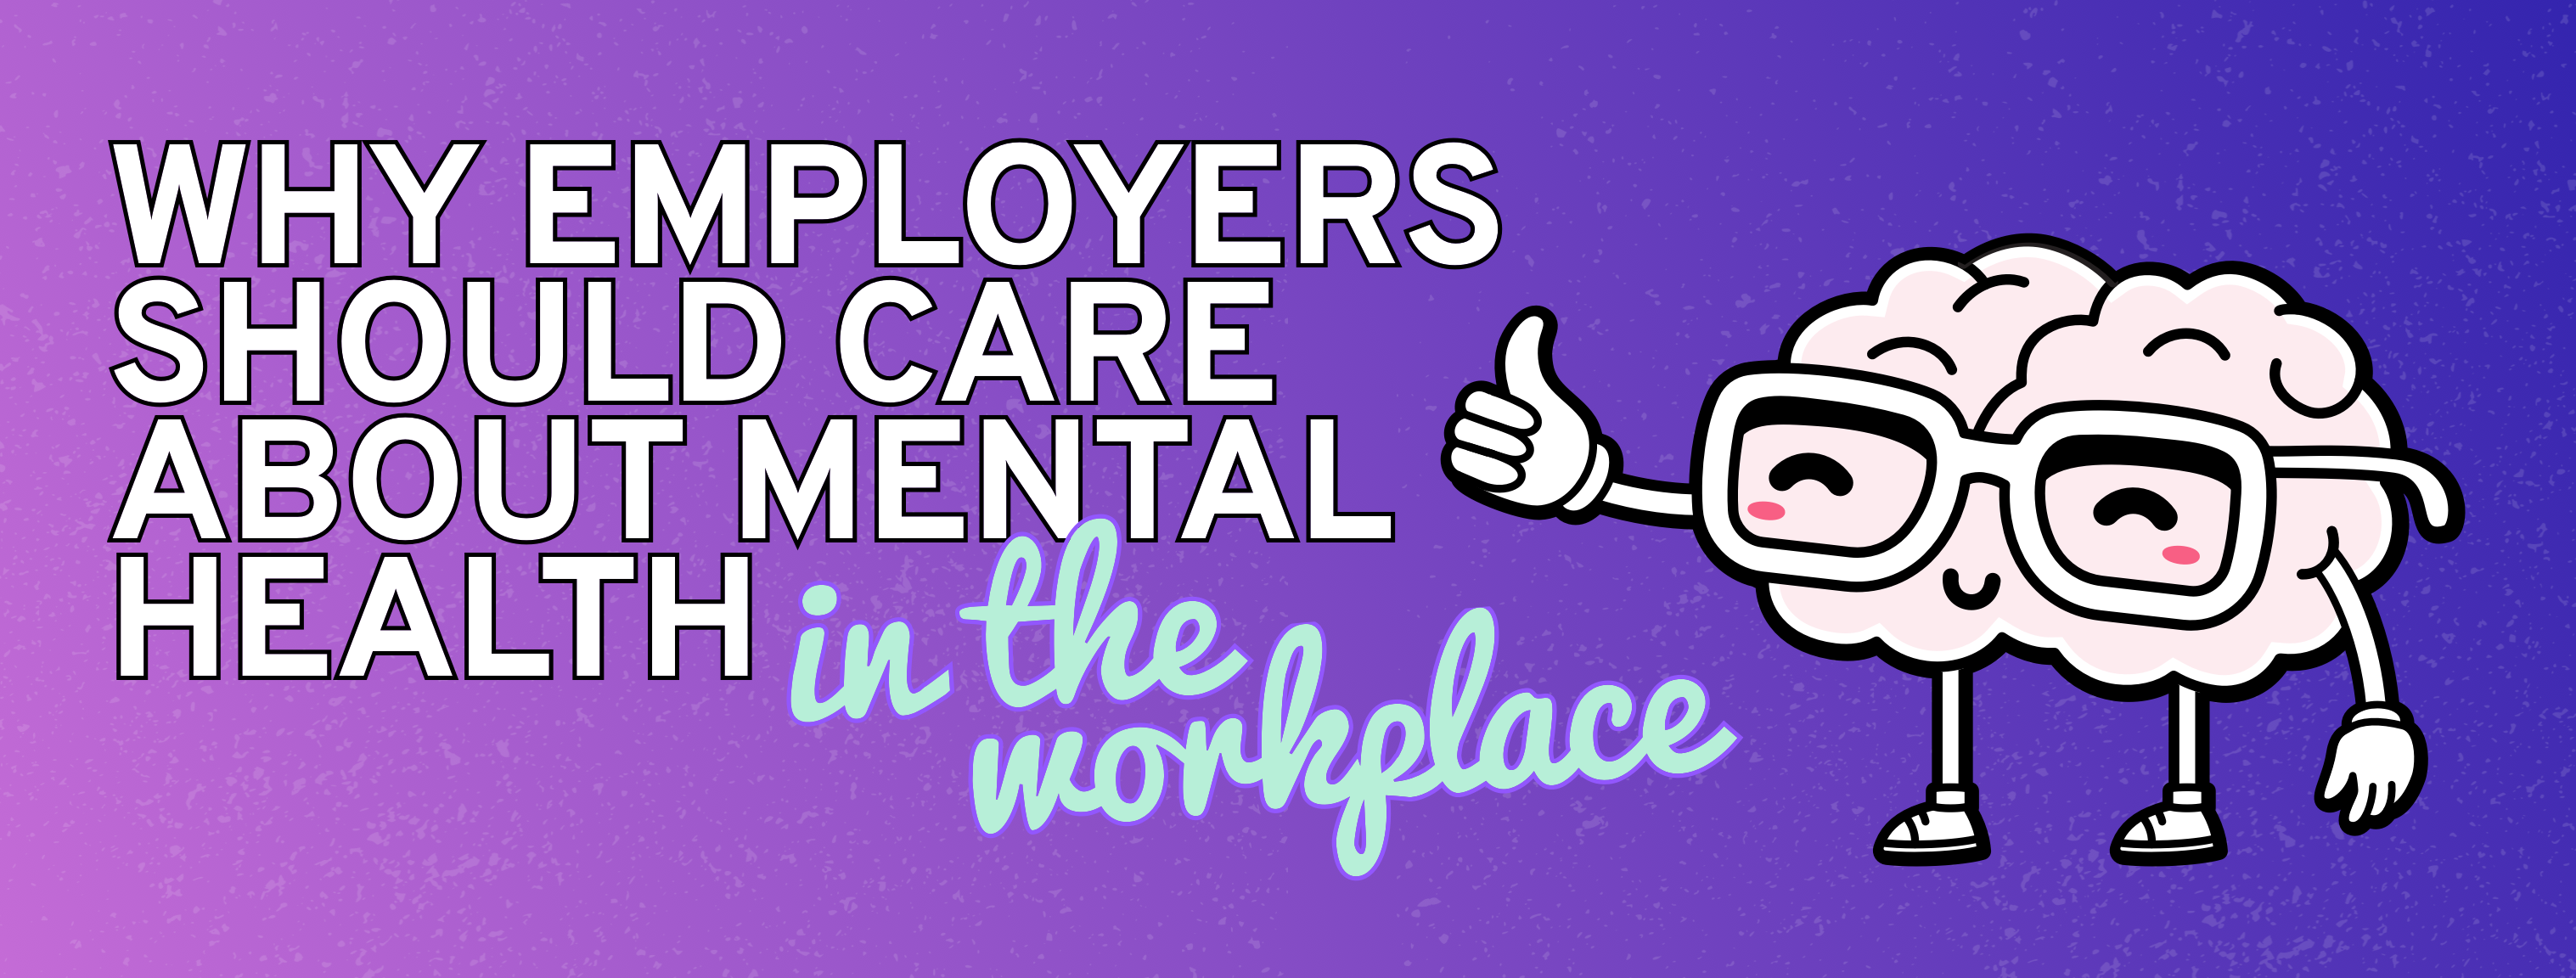 mental-health-in-the-workplace